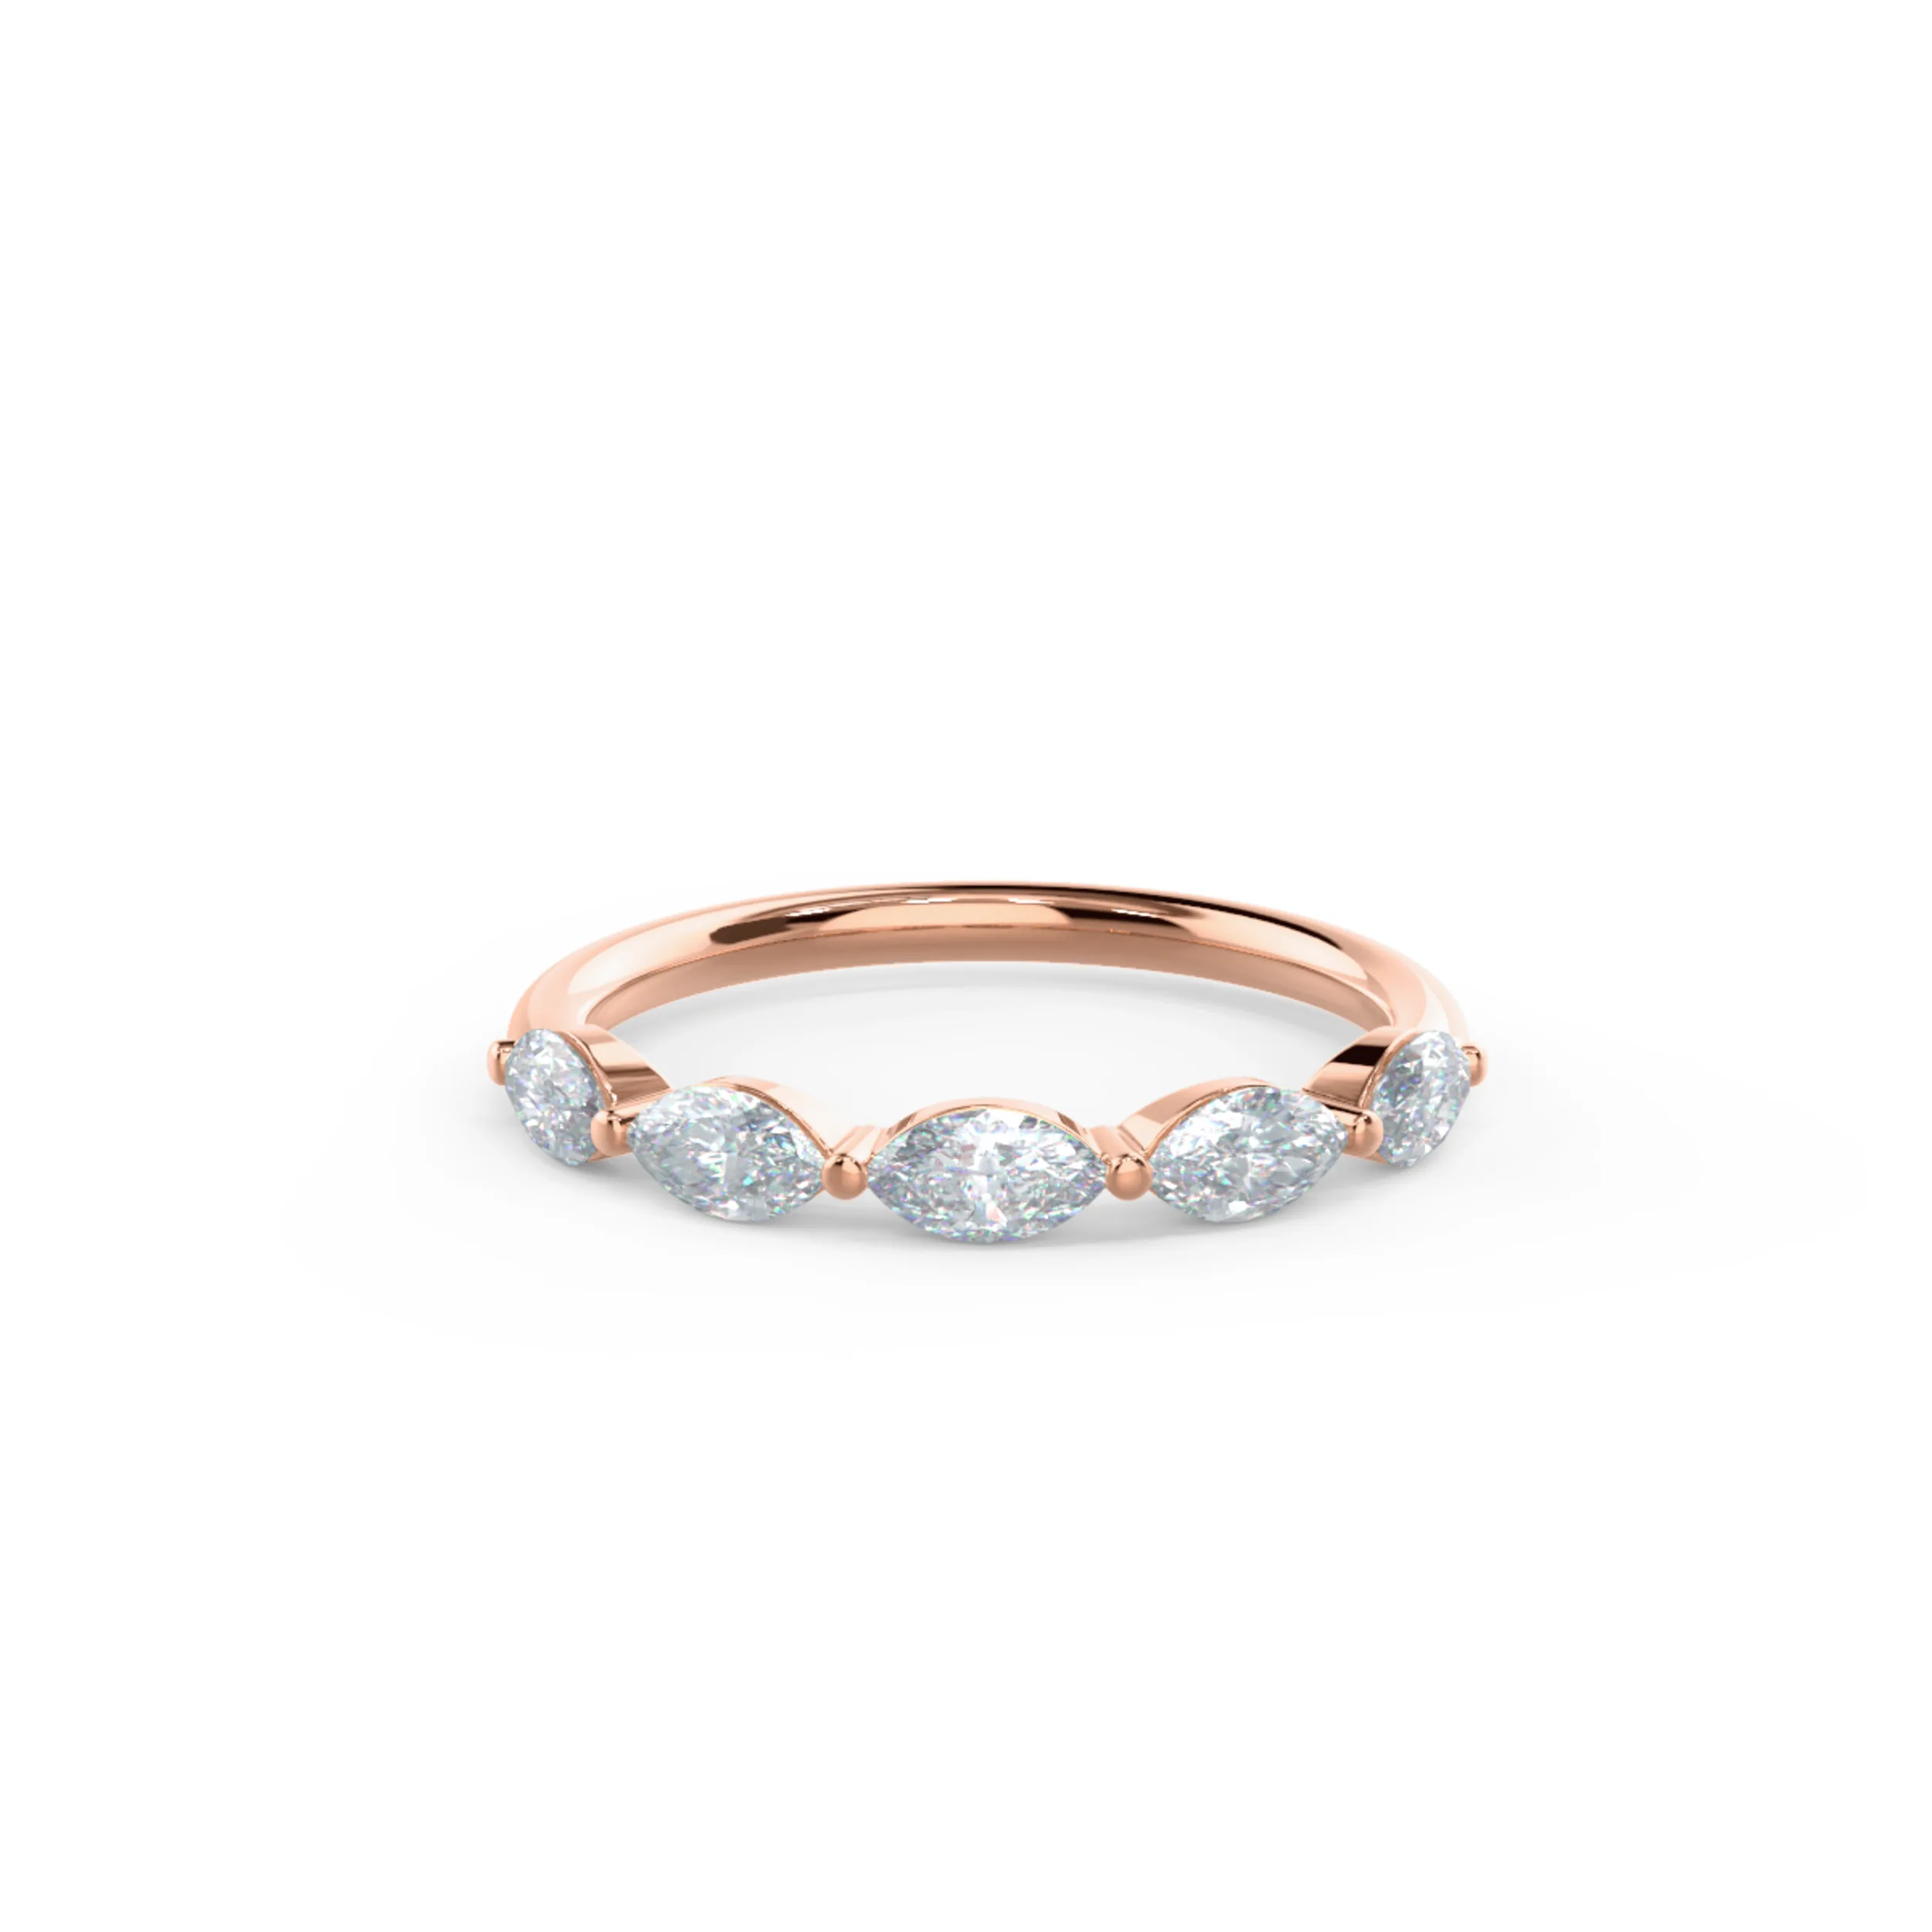 Hand Selected 0.75 Carat Synthetic Diamonds set in 14k Rose Gold Marquise East-West Five Stone (Main View)